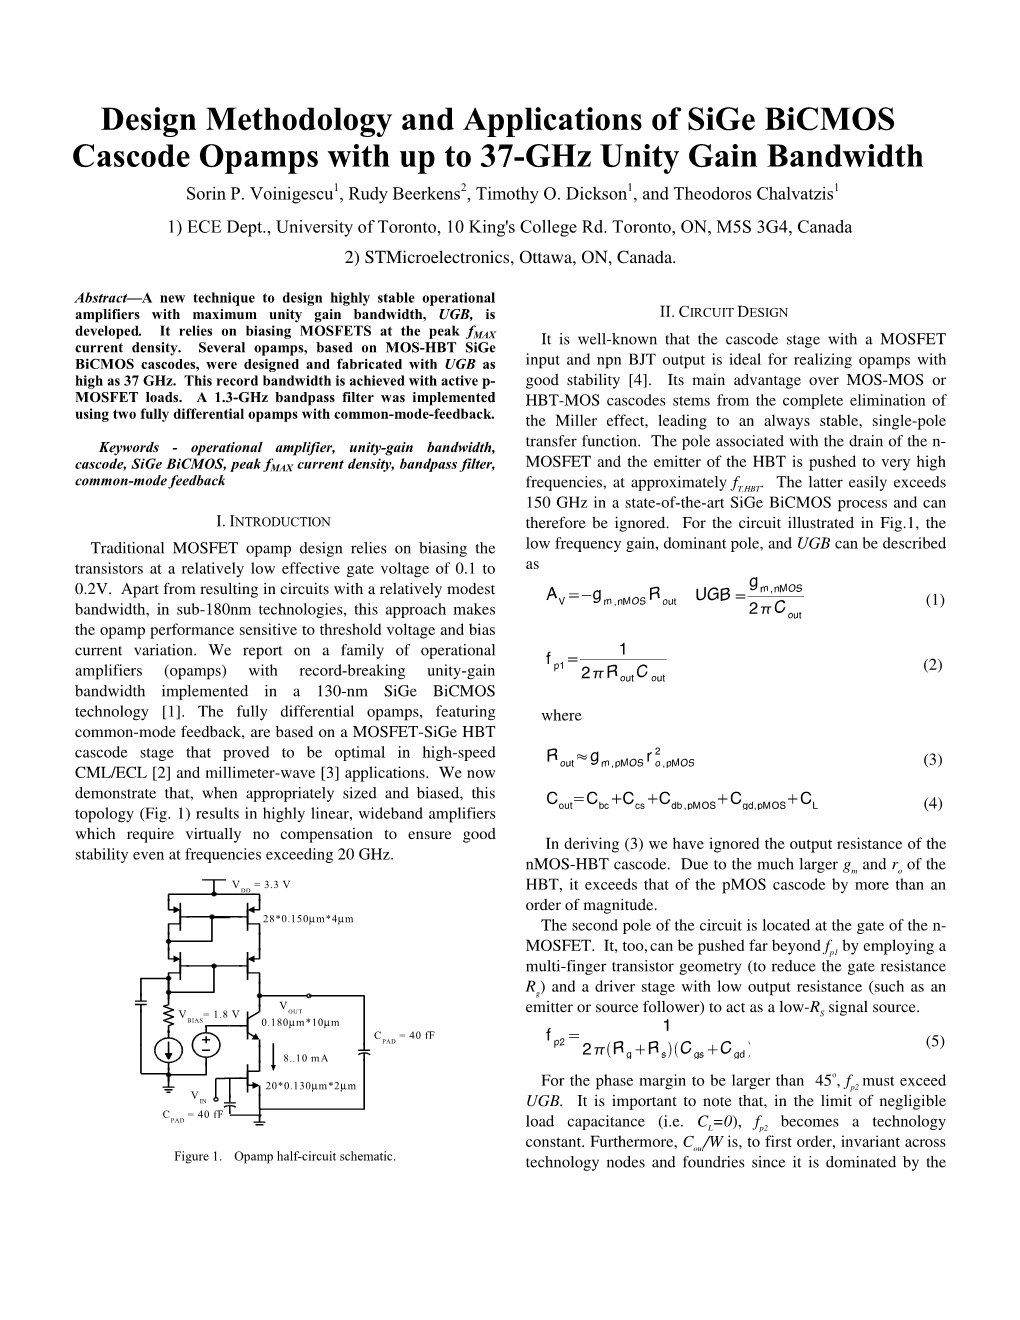 Design Methodology and Applications of Sige Bicmos Cascode Opamps with up to 37-Ghz Unity Gain Bandwidth Sorin P